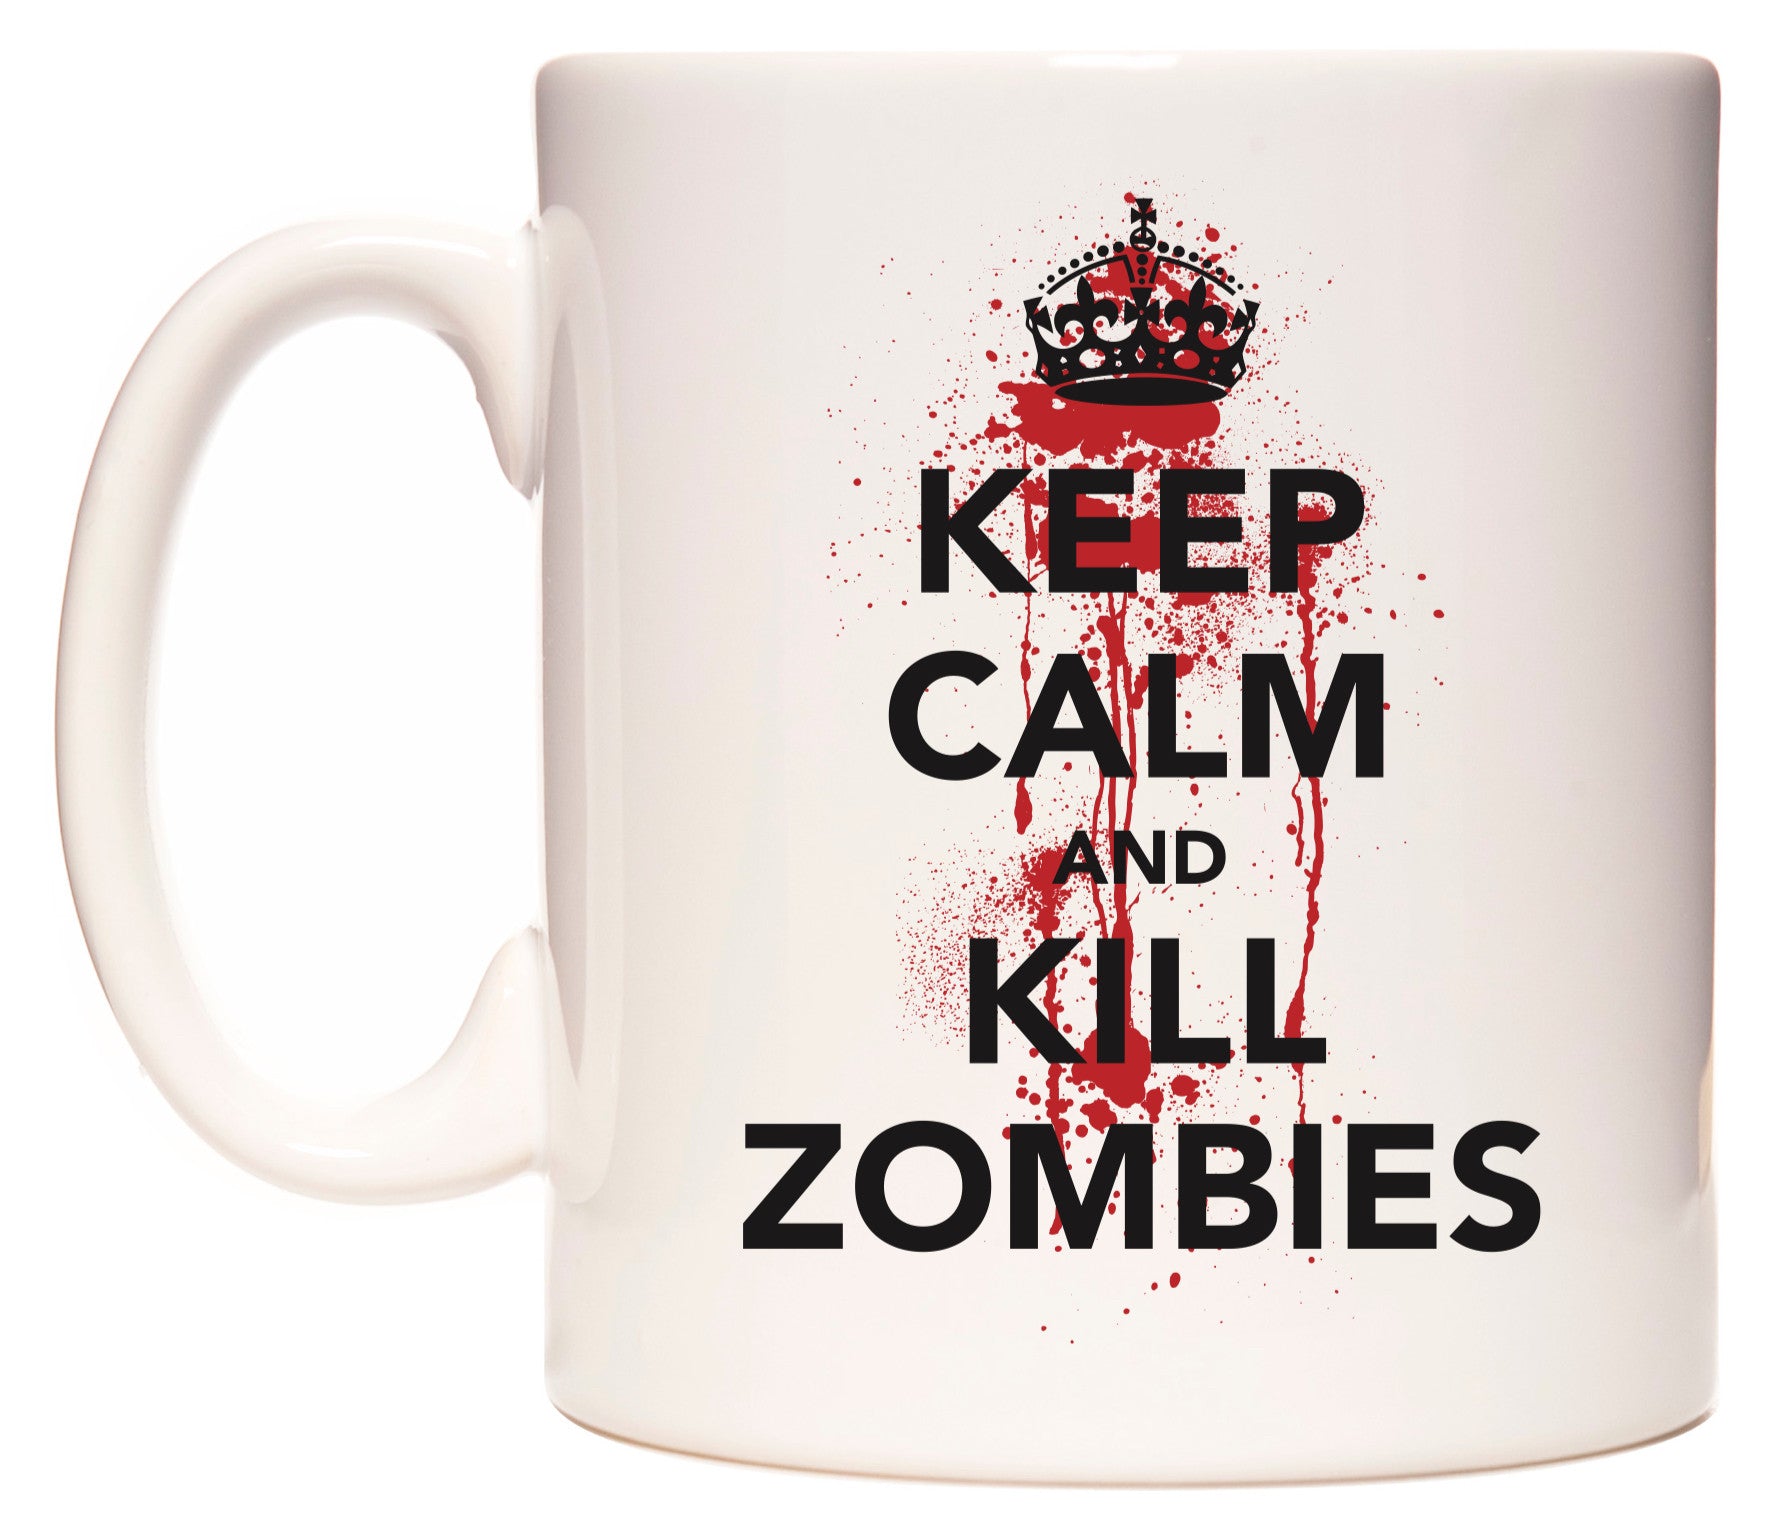 This mug features KEEP CALM AND KILL ZOMBIES